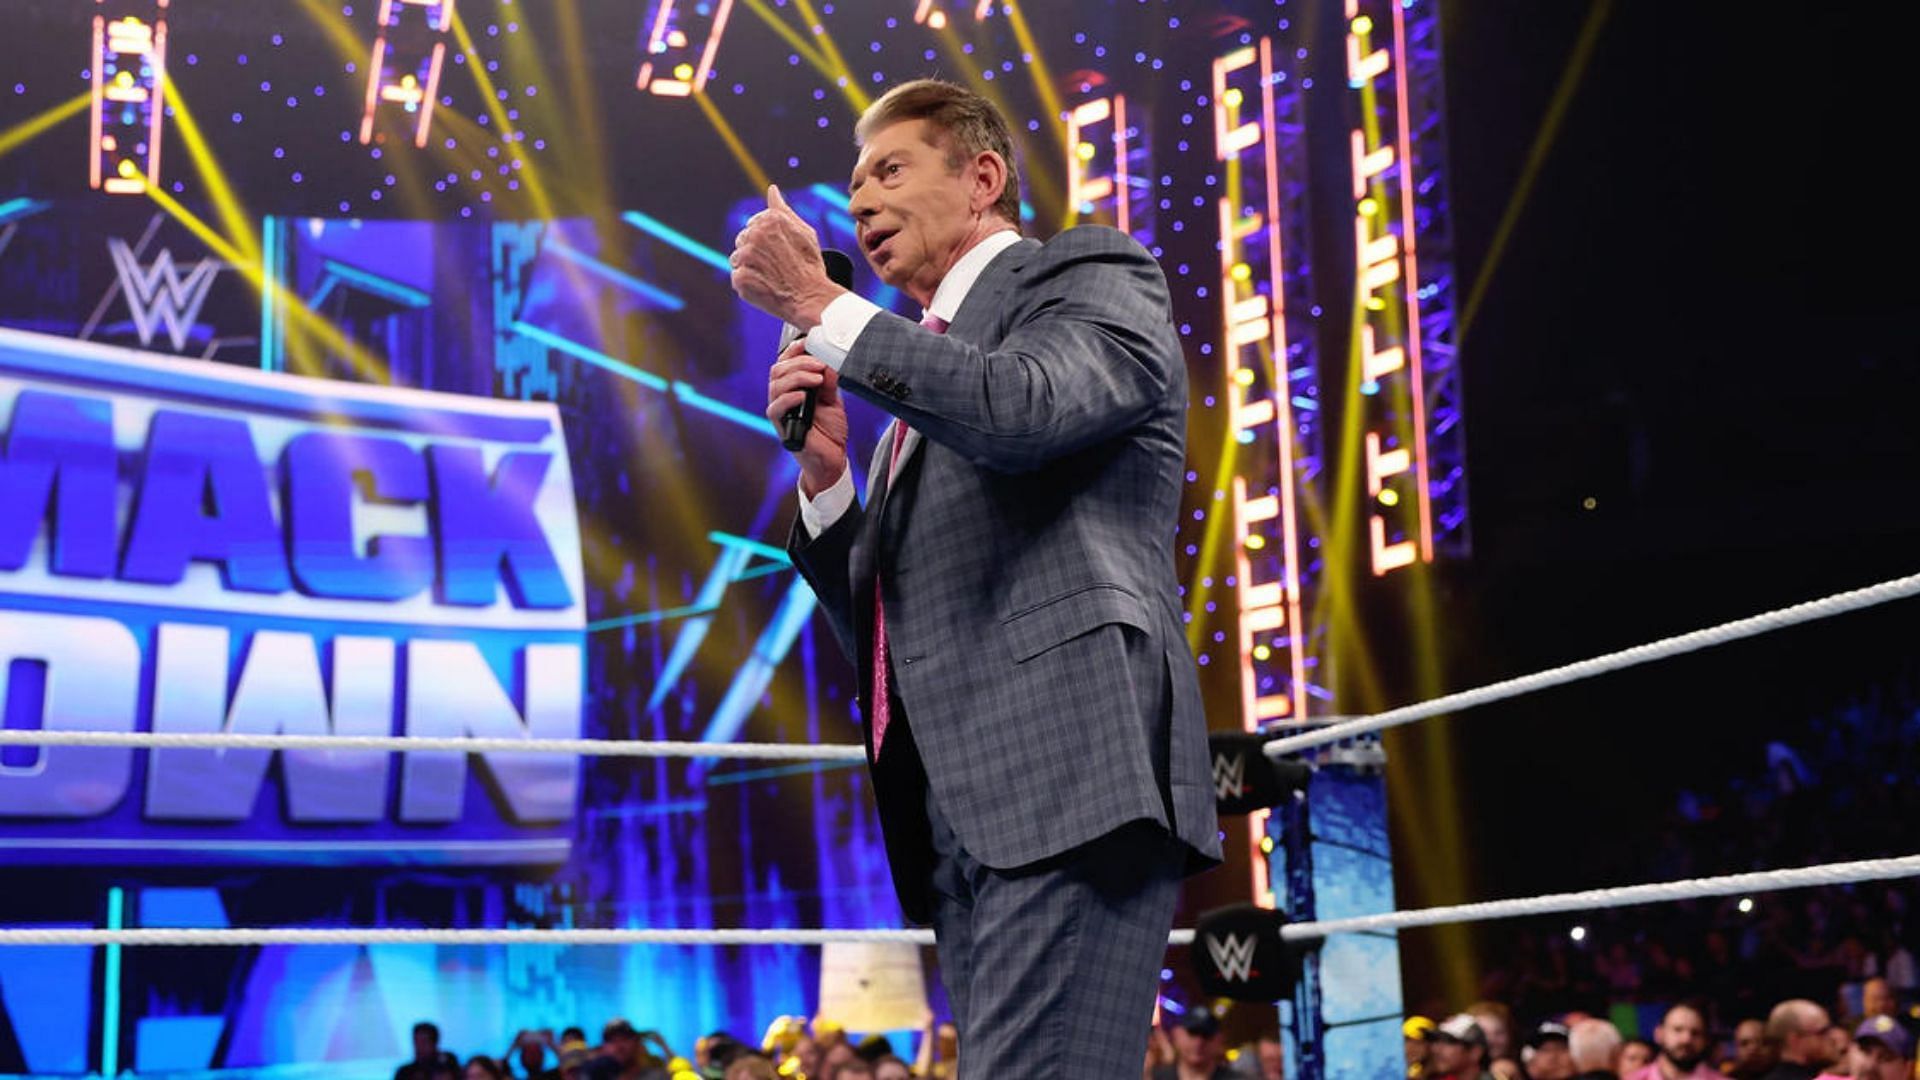 Vince McMahon appears on the June 17 edition of WWE SmackDown